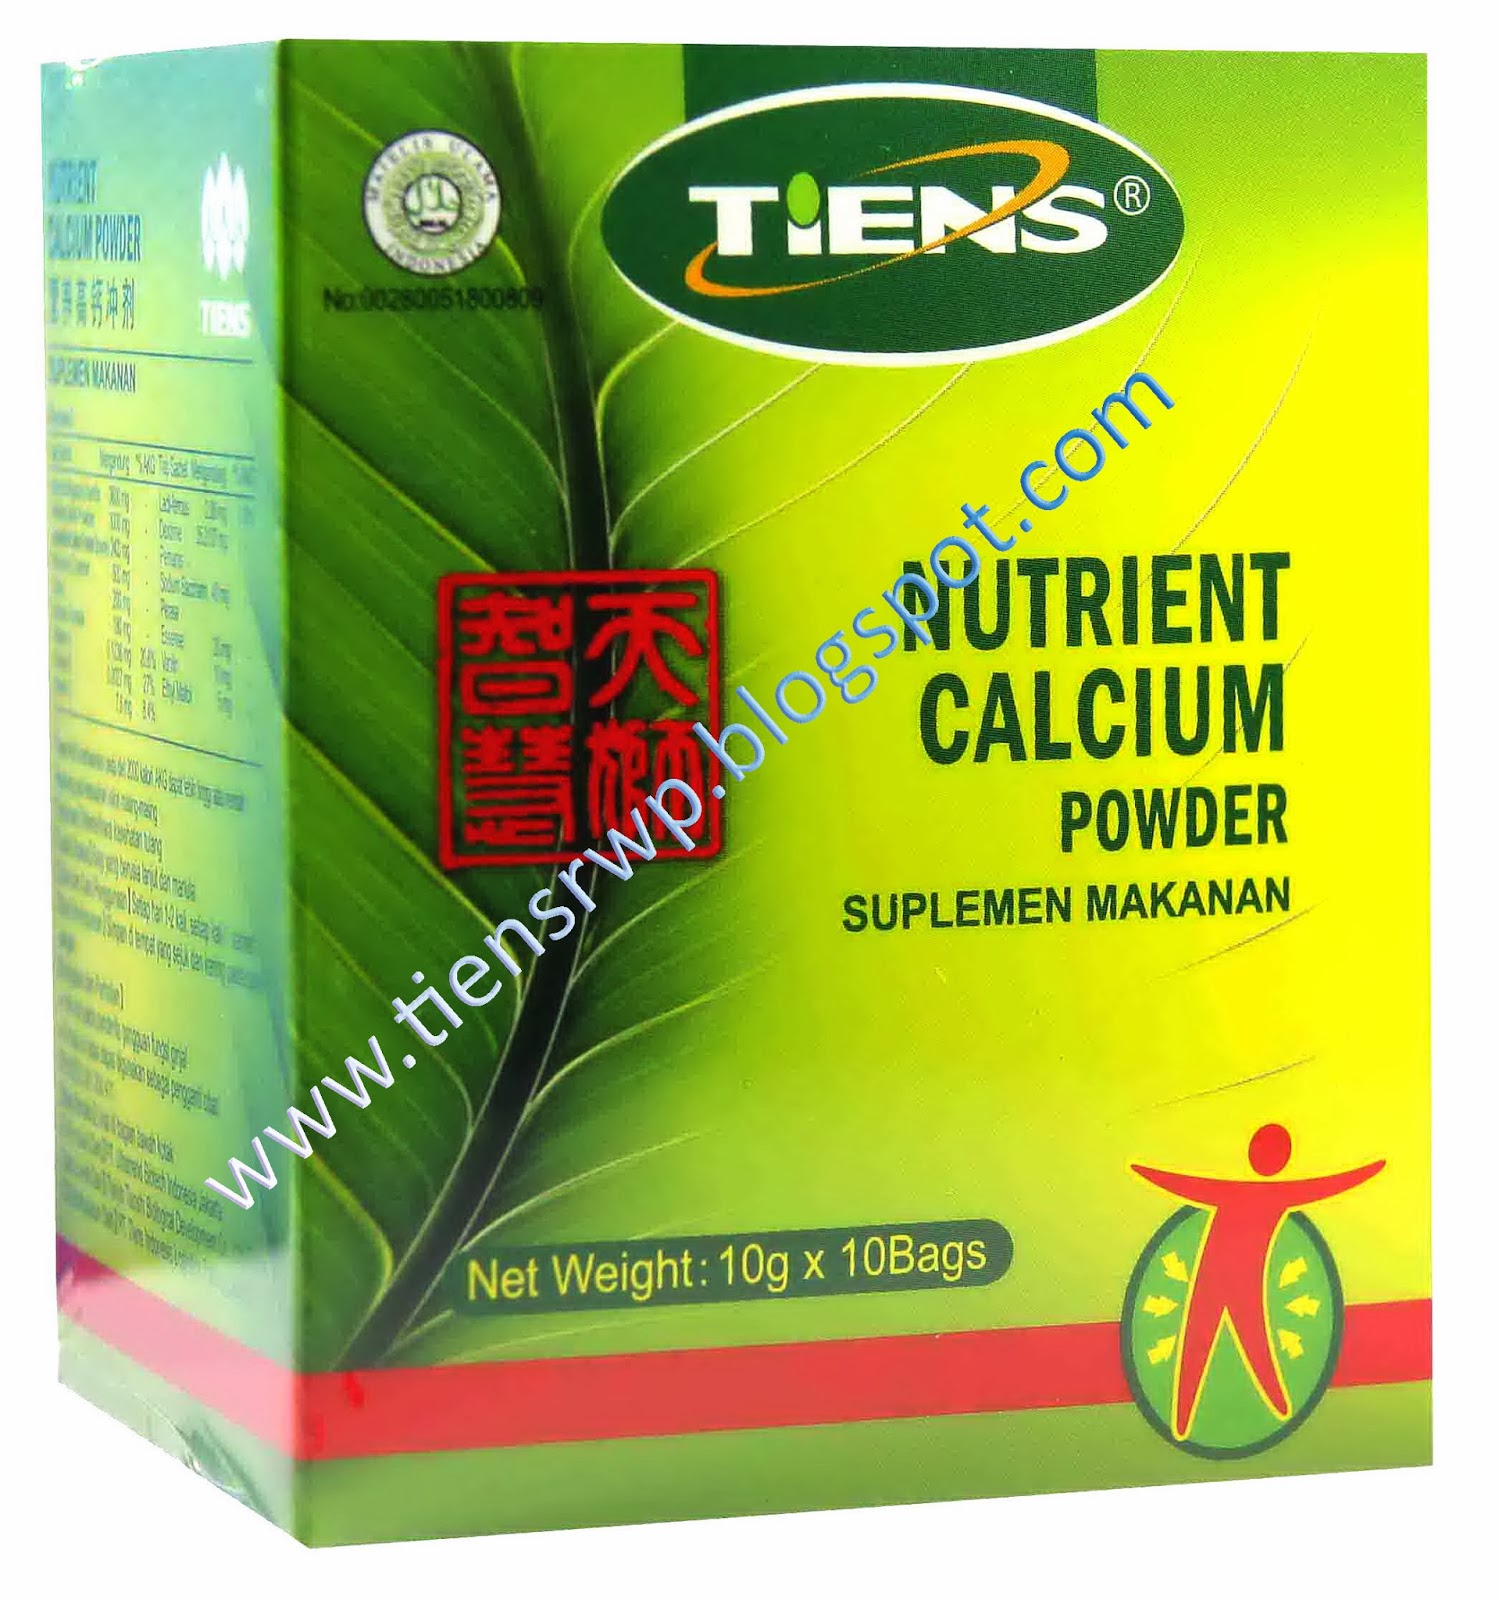 Tiens Products Pakistan | TIANSHI INTERNATIONAL | Career Opportunity ...